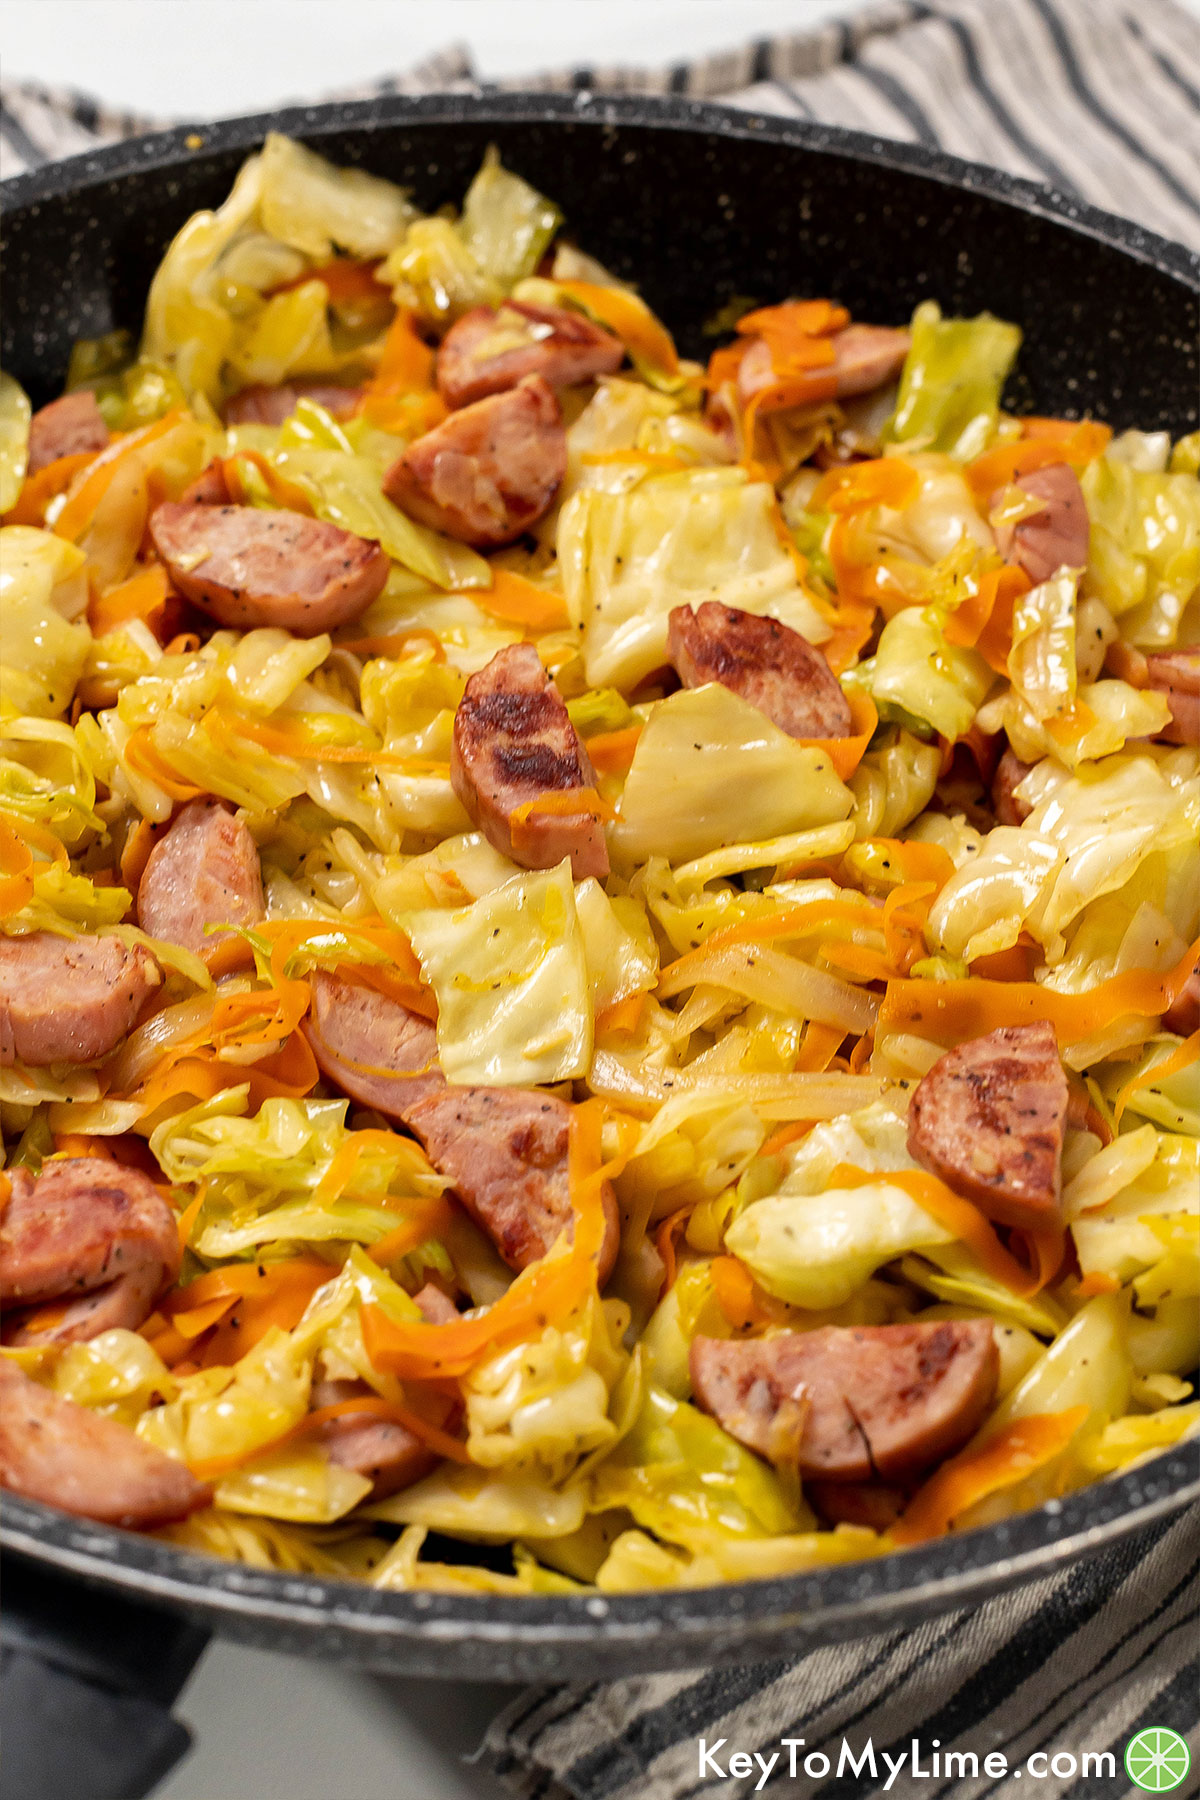 A fully cooked cabbage and sausage meal in a large skillet.